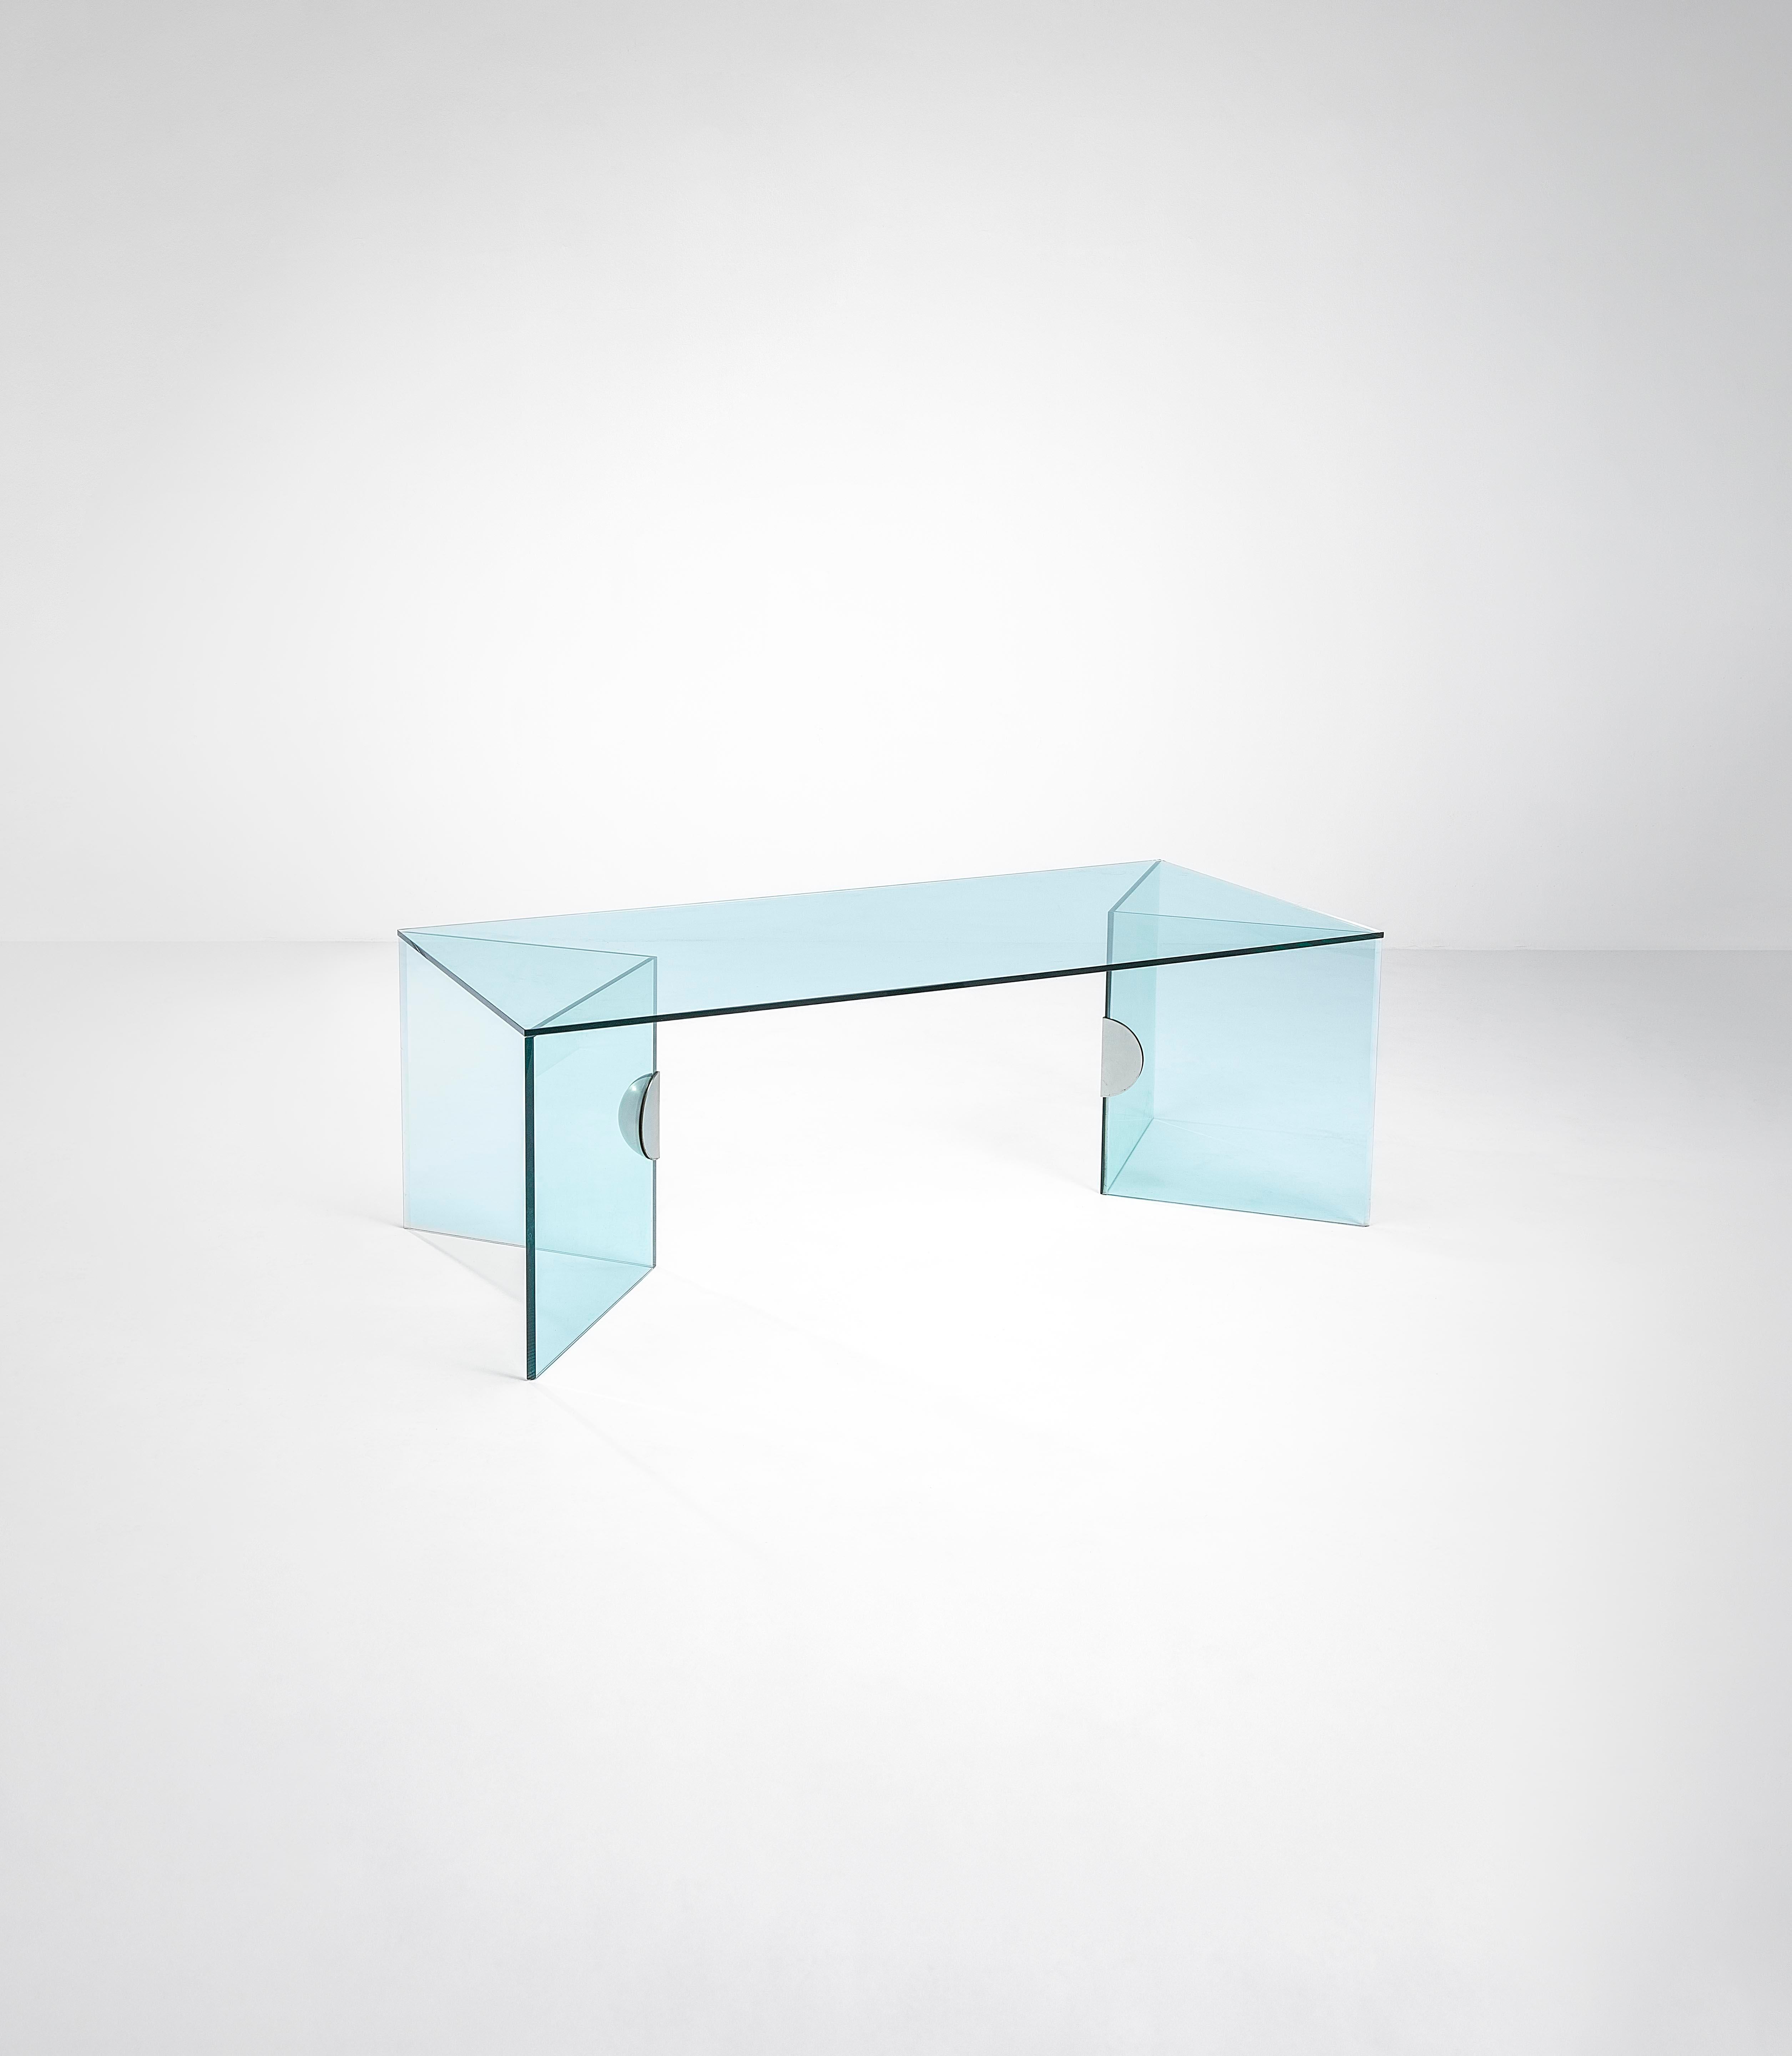 This rare Merlino dining table comes directly from the home of a high-ranking Fontana Arte executive in Milan and is a very rare model. The crystal plate structure with nickel-plated brass joints is the very essence of glass and its physical